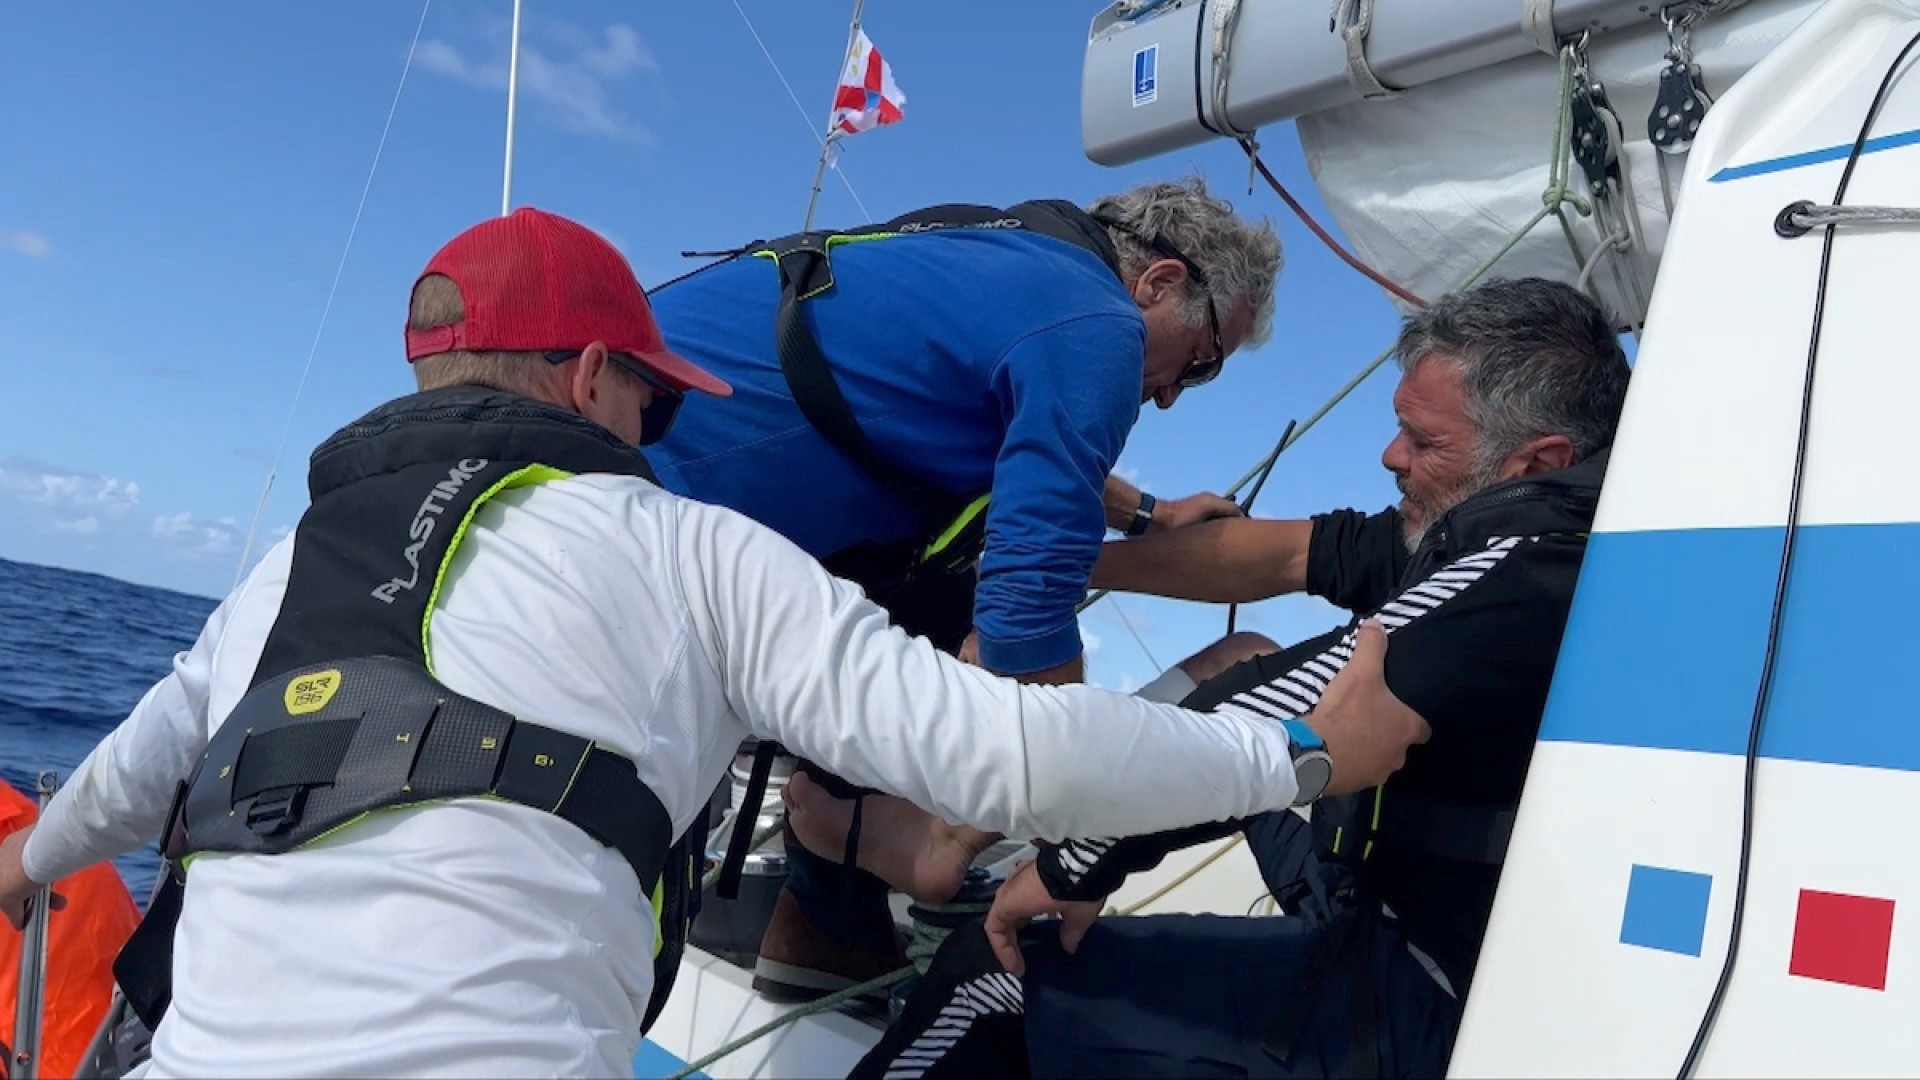 Captain of Triana, Jean d'Arthuys, considered transferring Stéphane Raguenes to a passing cargo ship. Credit: Margault Demasles / Team Triana / OGR2023